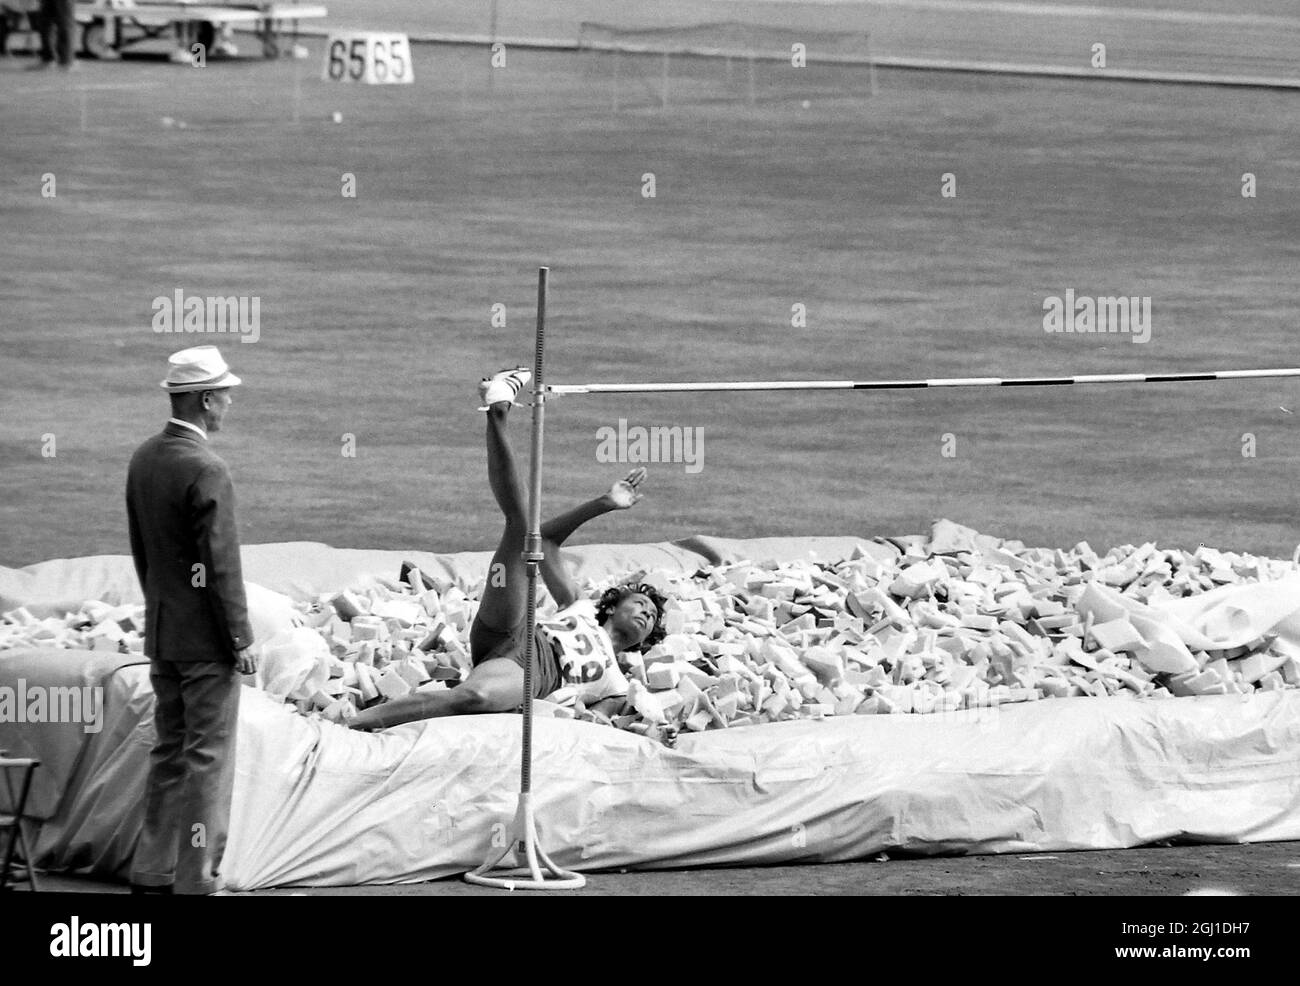 OLYMPICS, OLYMPIC SPORT GAMES - THE XVIII 18TH OLYMPIAD IN TOKYO, JAPAN - FIELD EVENTS OLYMPICS WOMENS HIGH JUMP BASKERVILLE US ELIMINATION ROUND  ;  16 OCTOBER 1964 Stock Photo